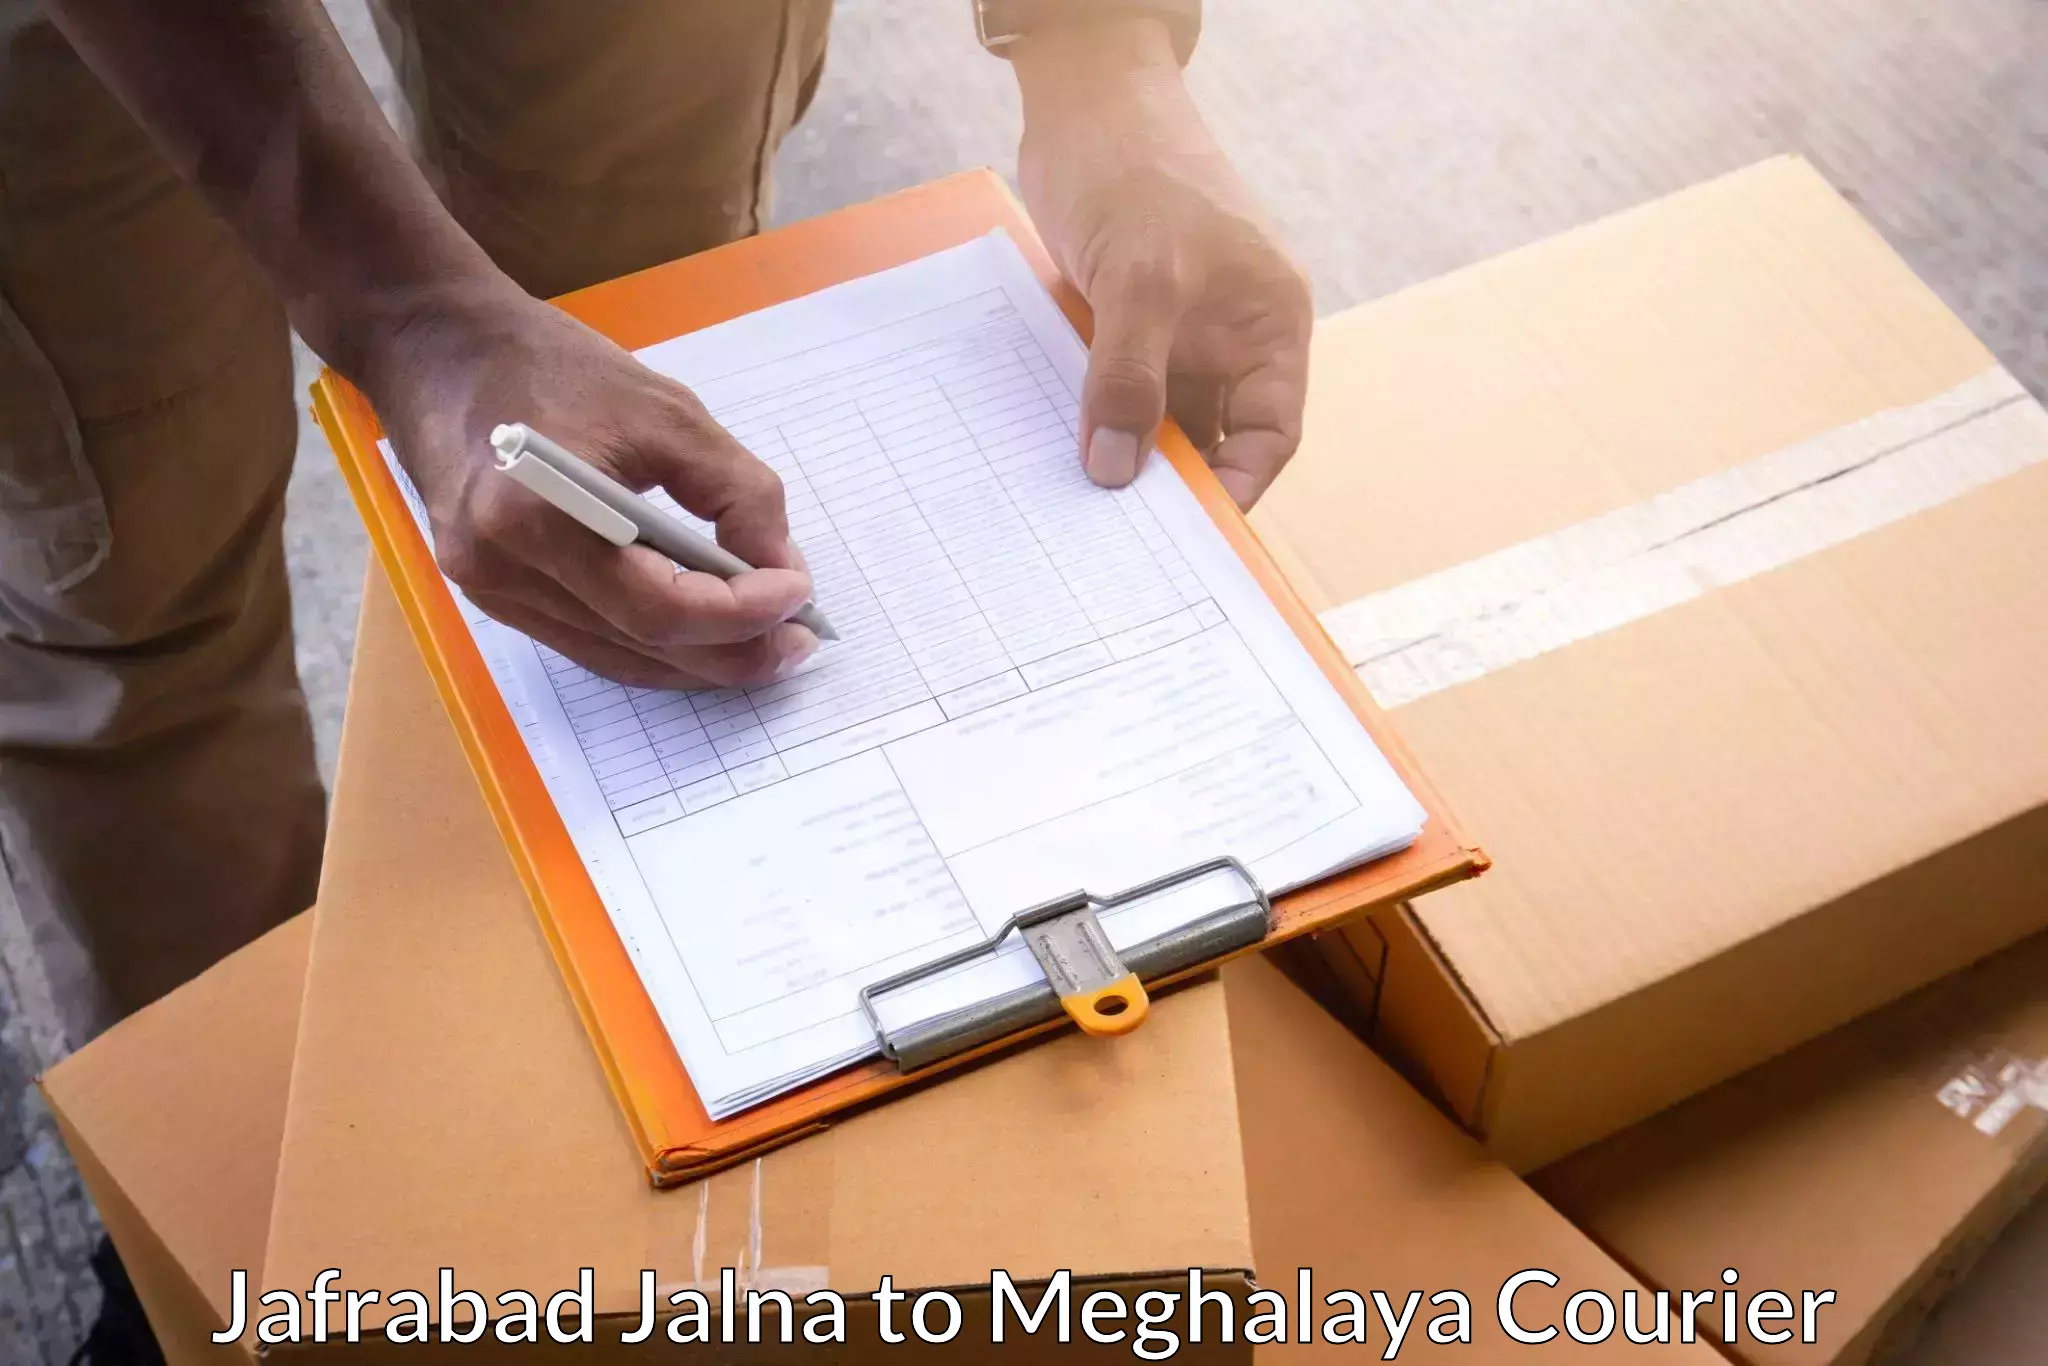 Bulk courier orders Jafrabad Jalna to Tura